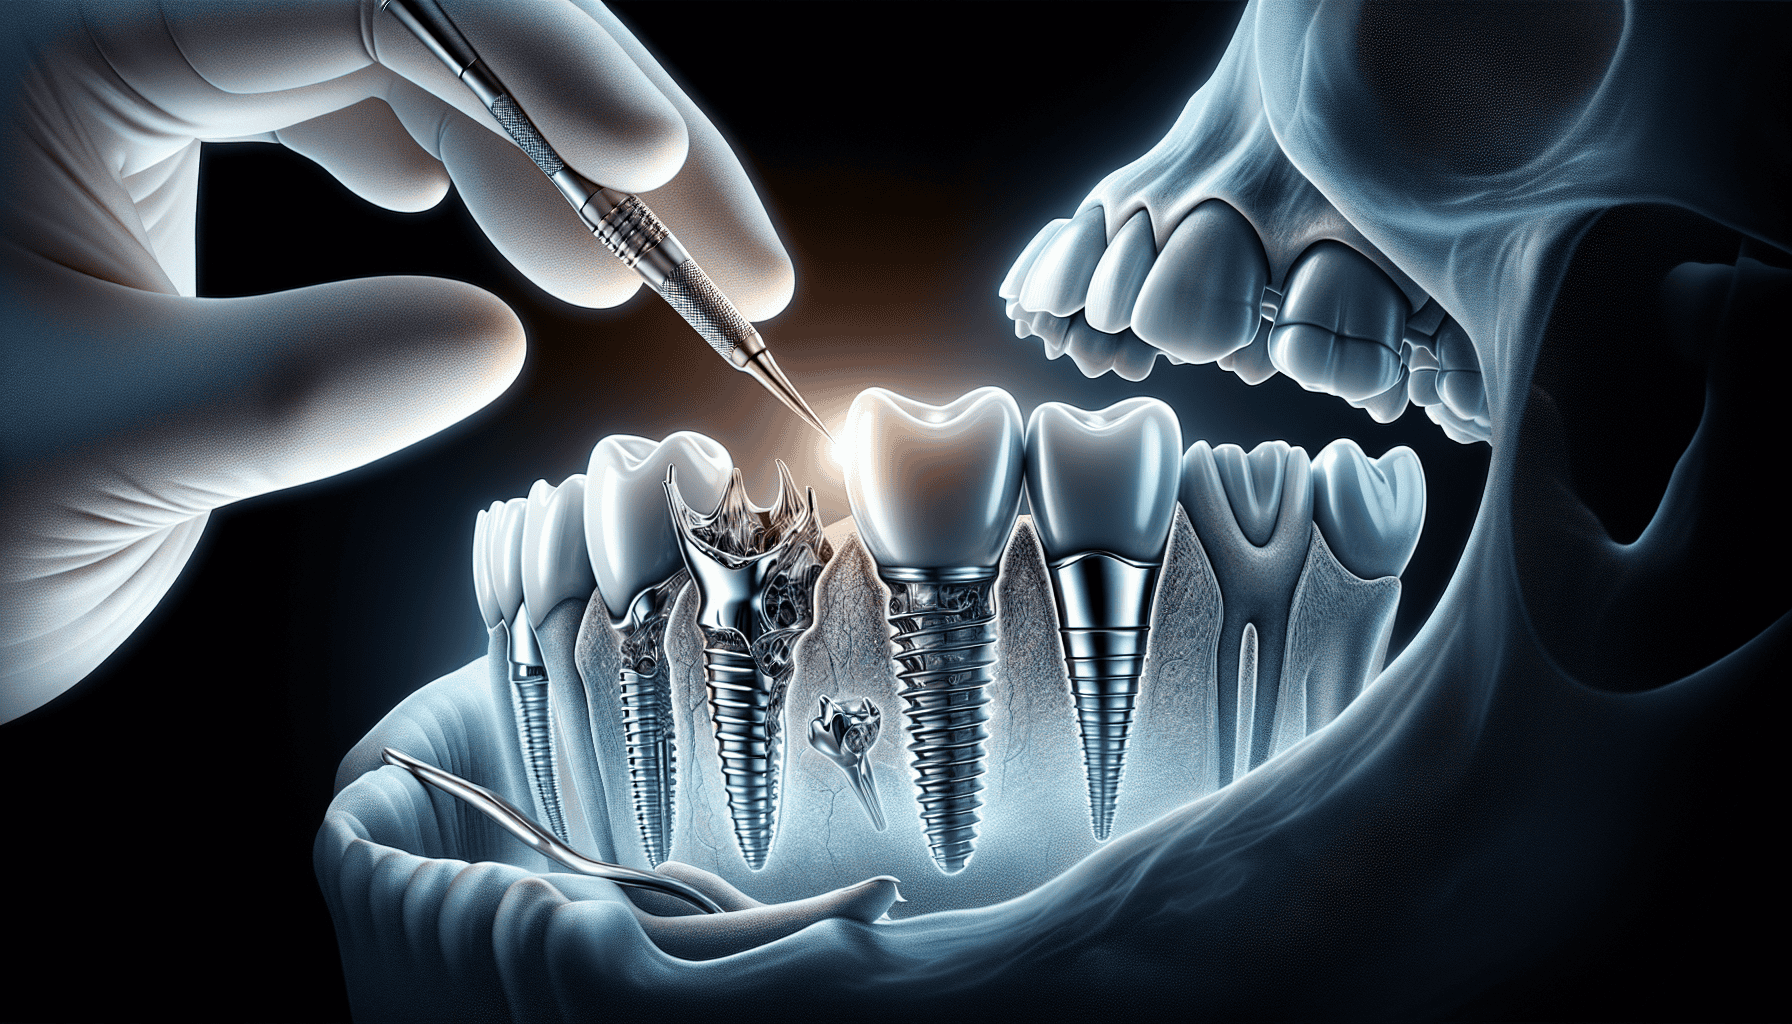 Surgical placement of zirconia implants